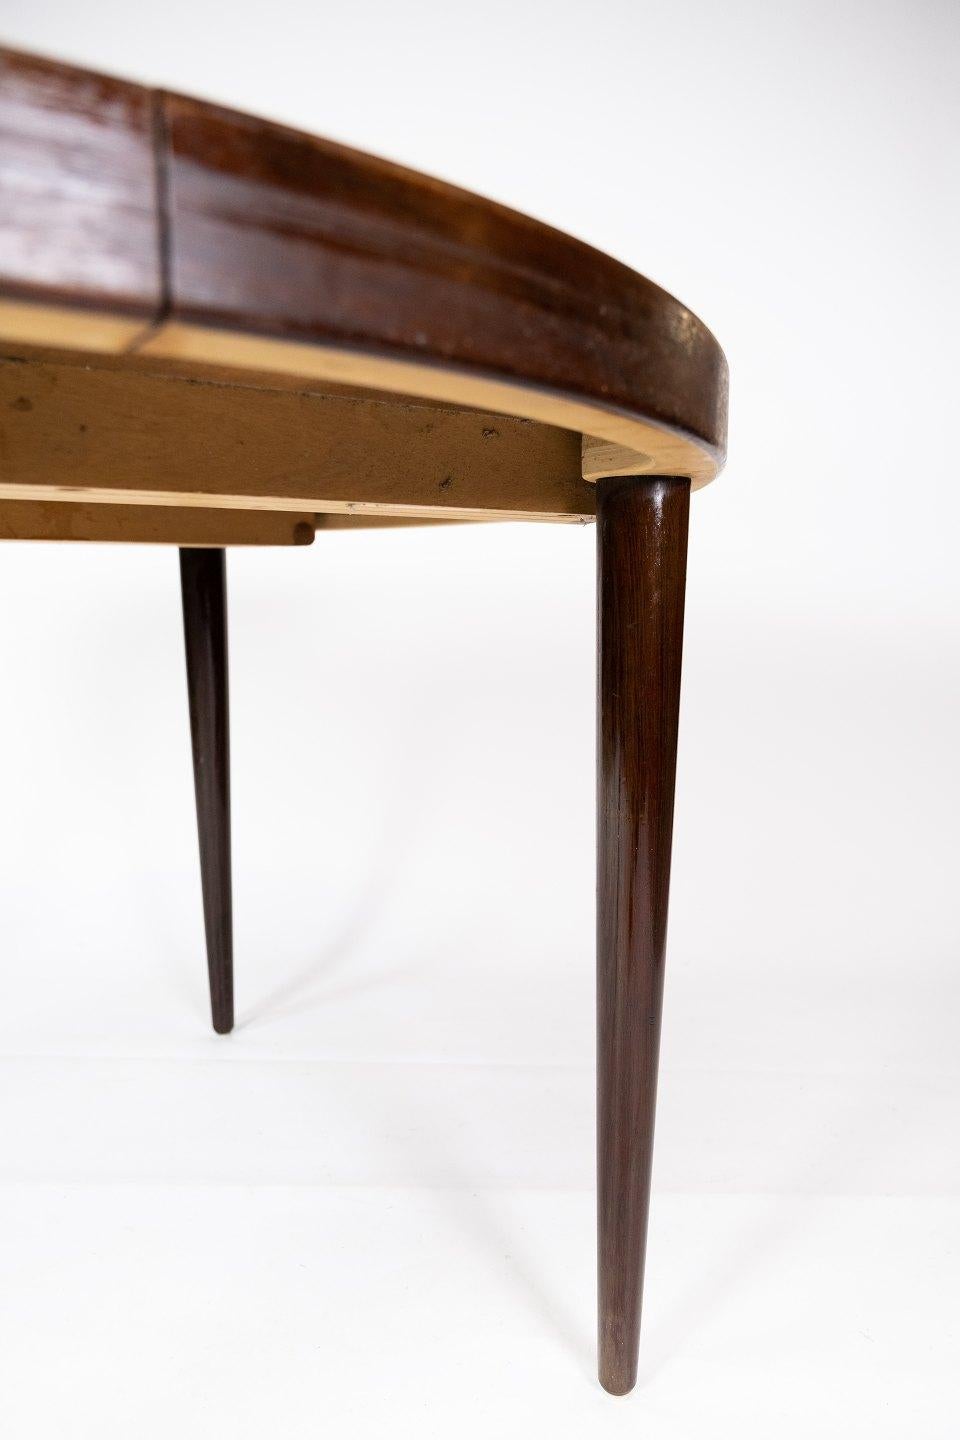 this table is made for rosewood